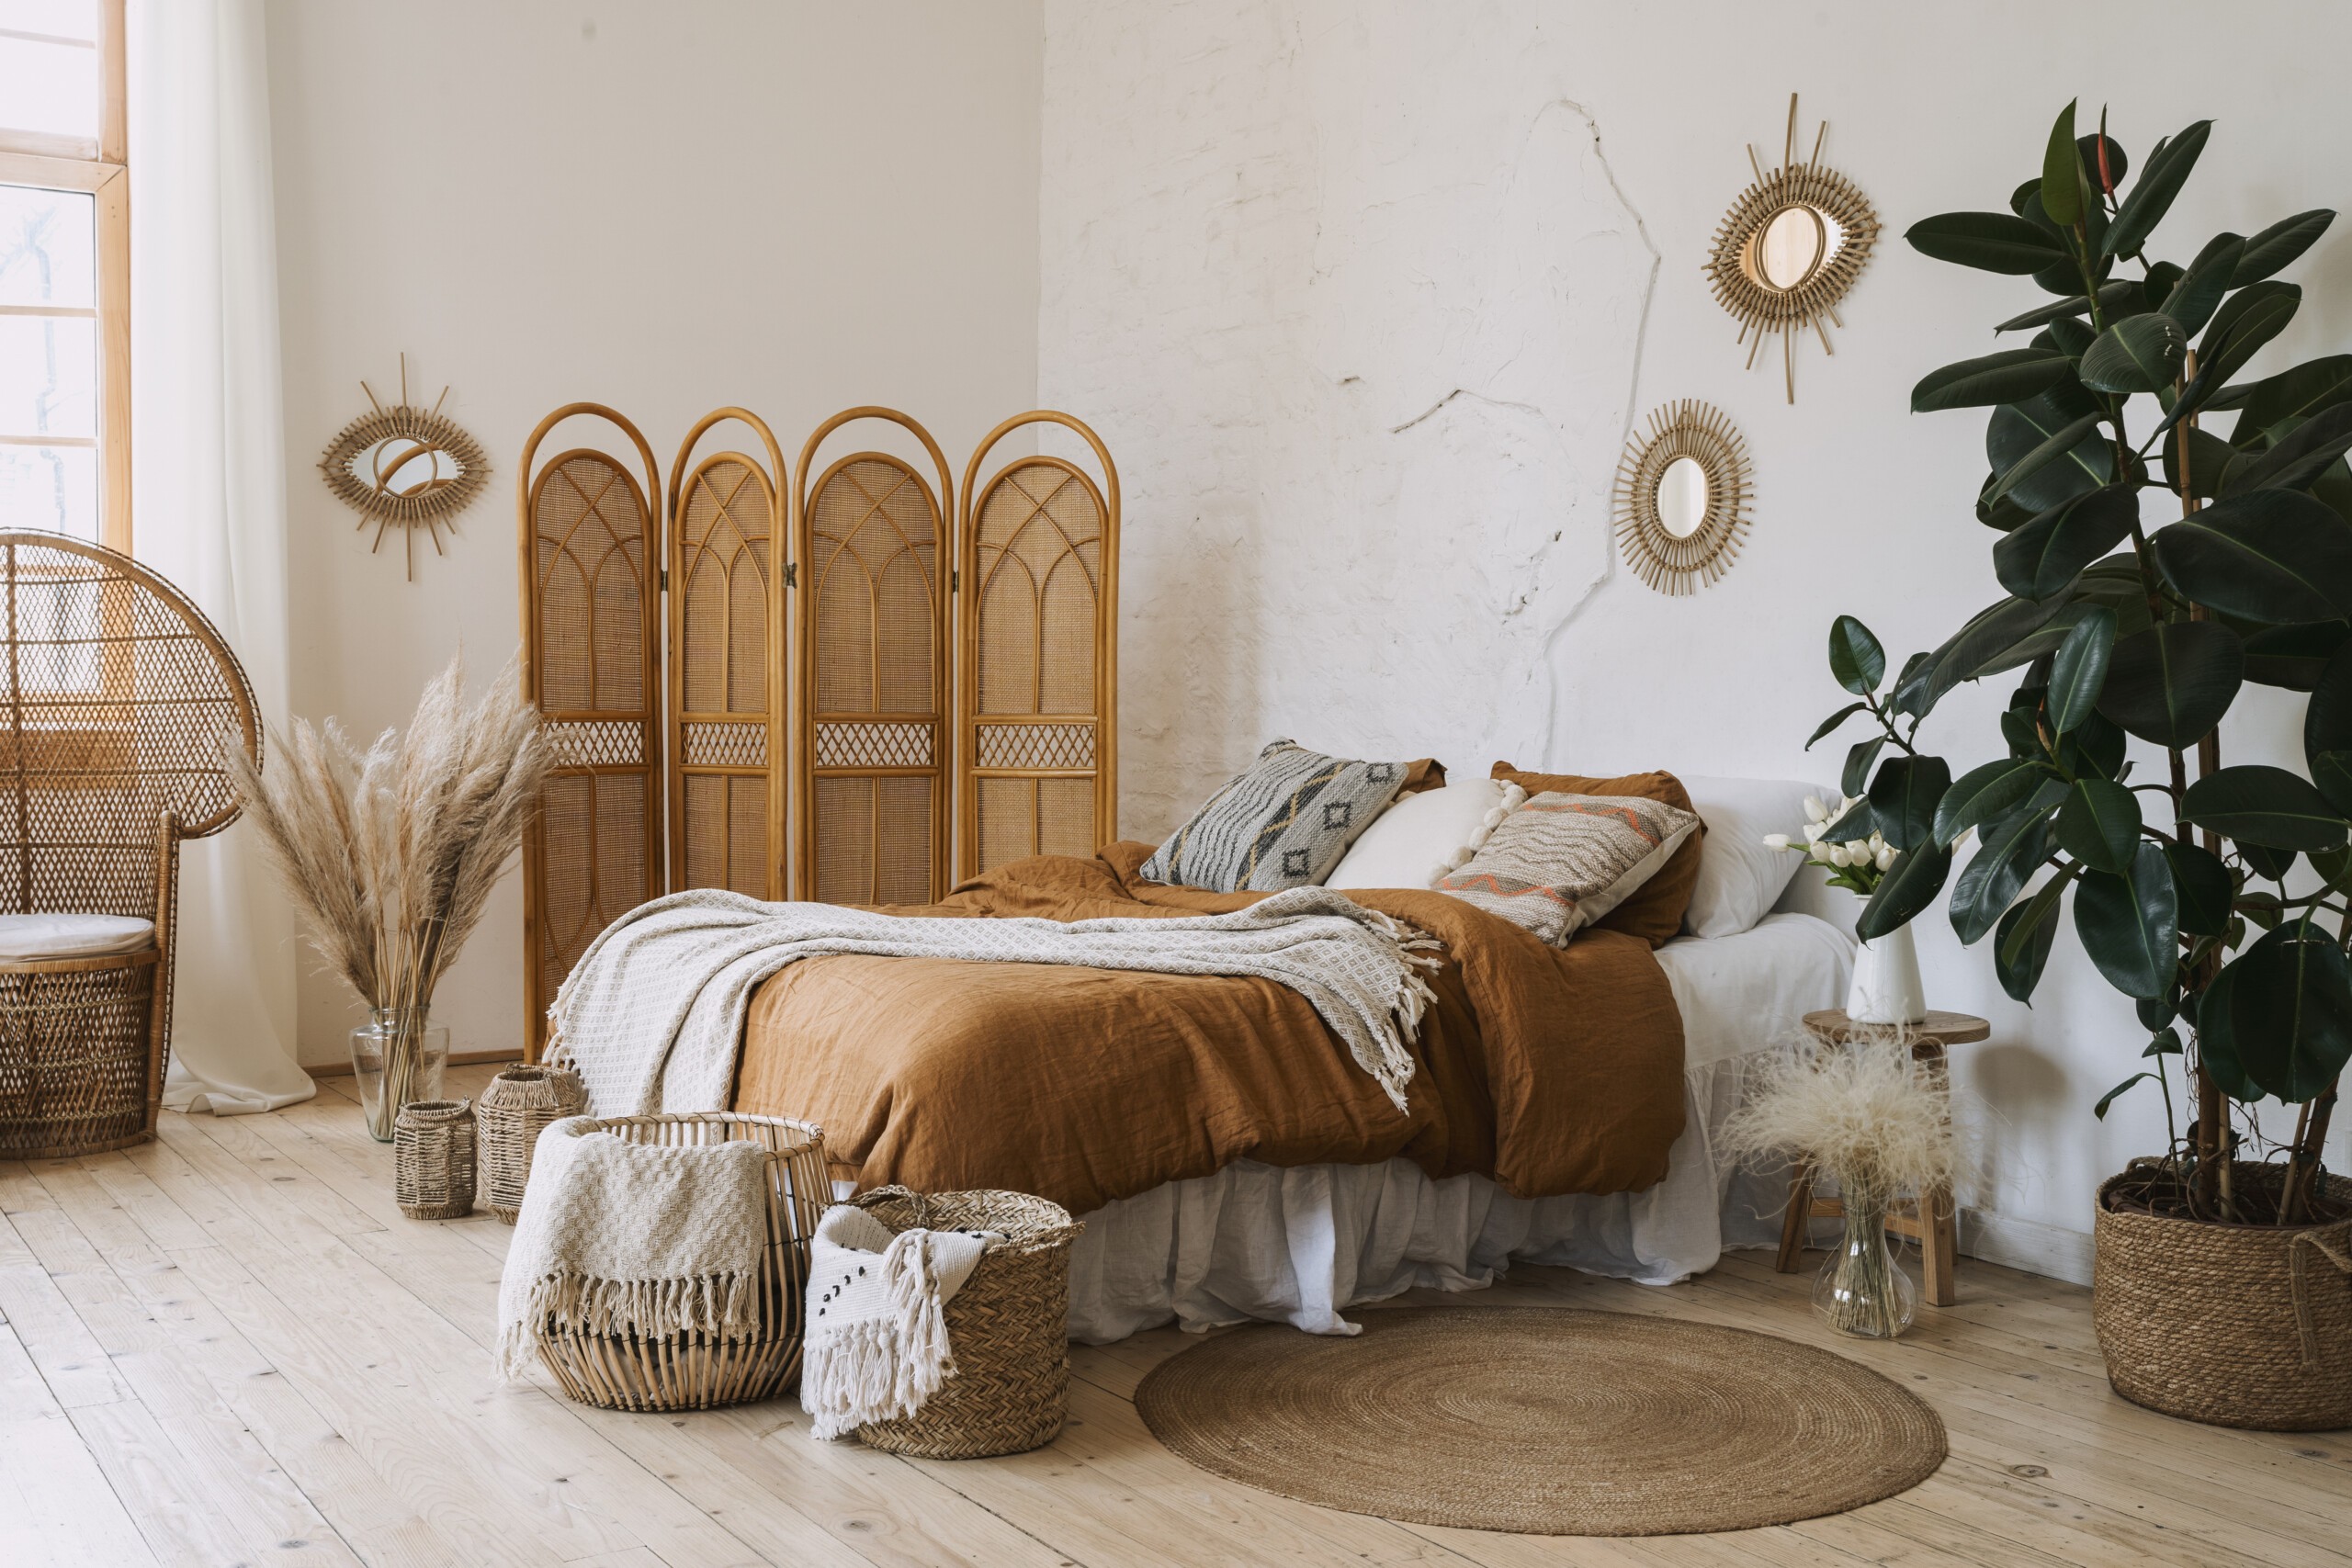 Bohemian Design Style: What It Means And How To Get The Look